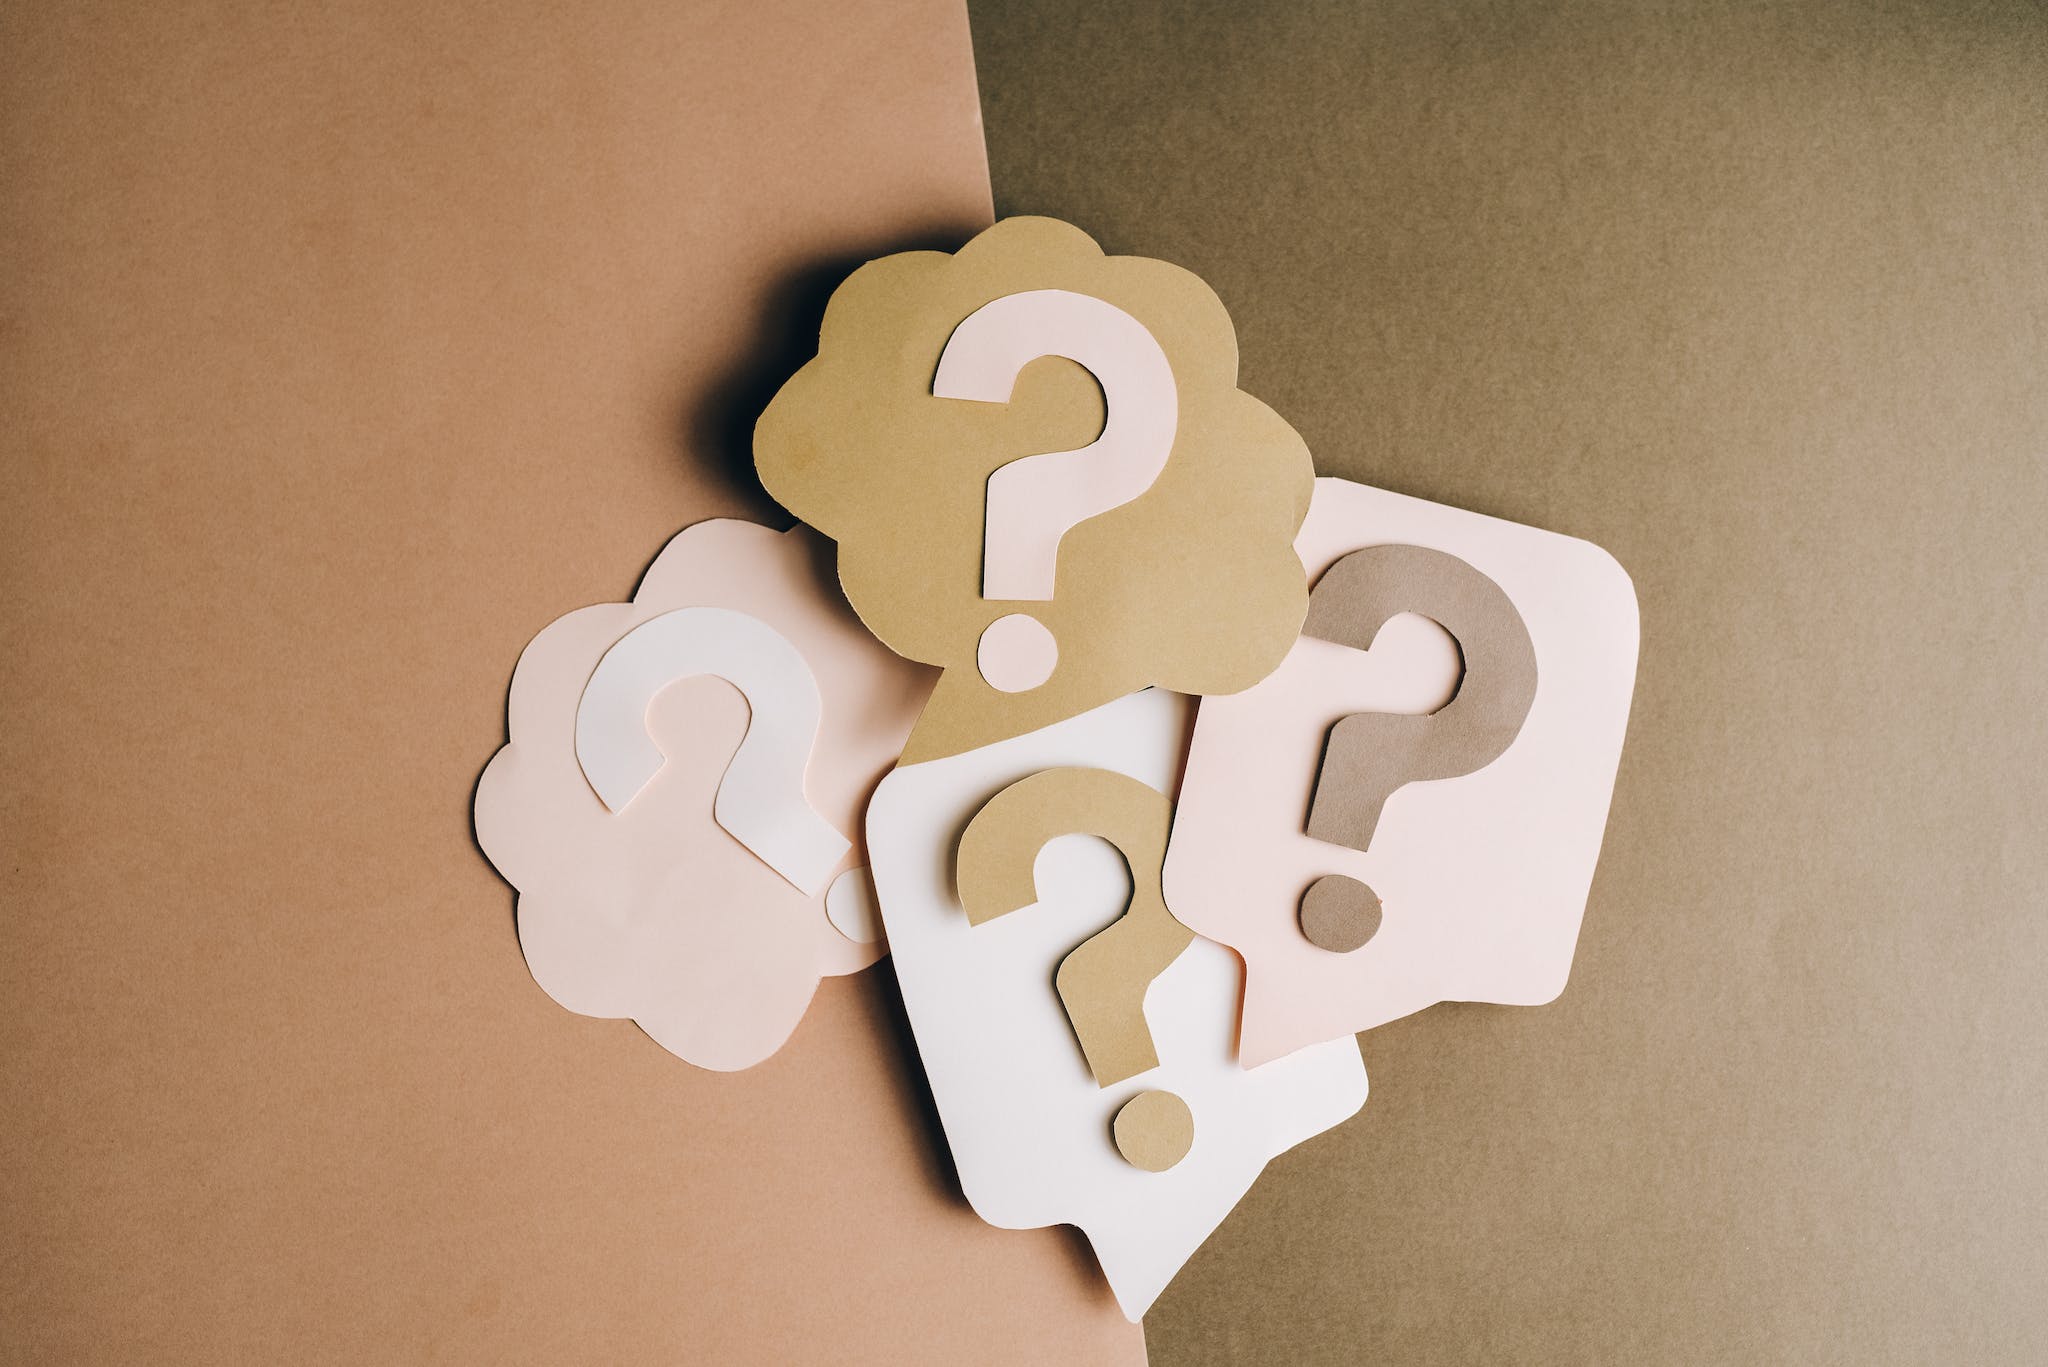 Juicy CRM FAQ Question Marks on Paper Crafts